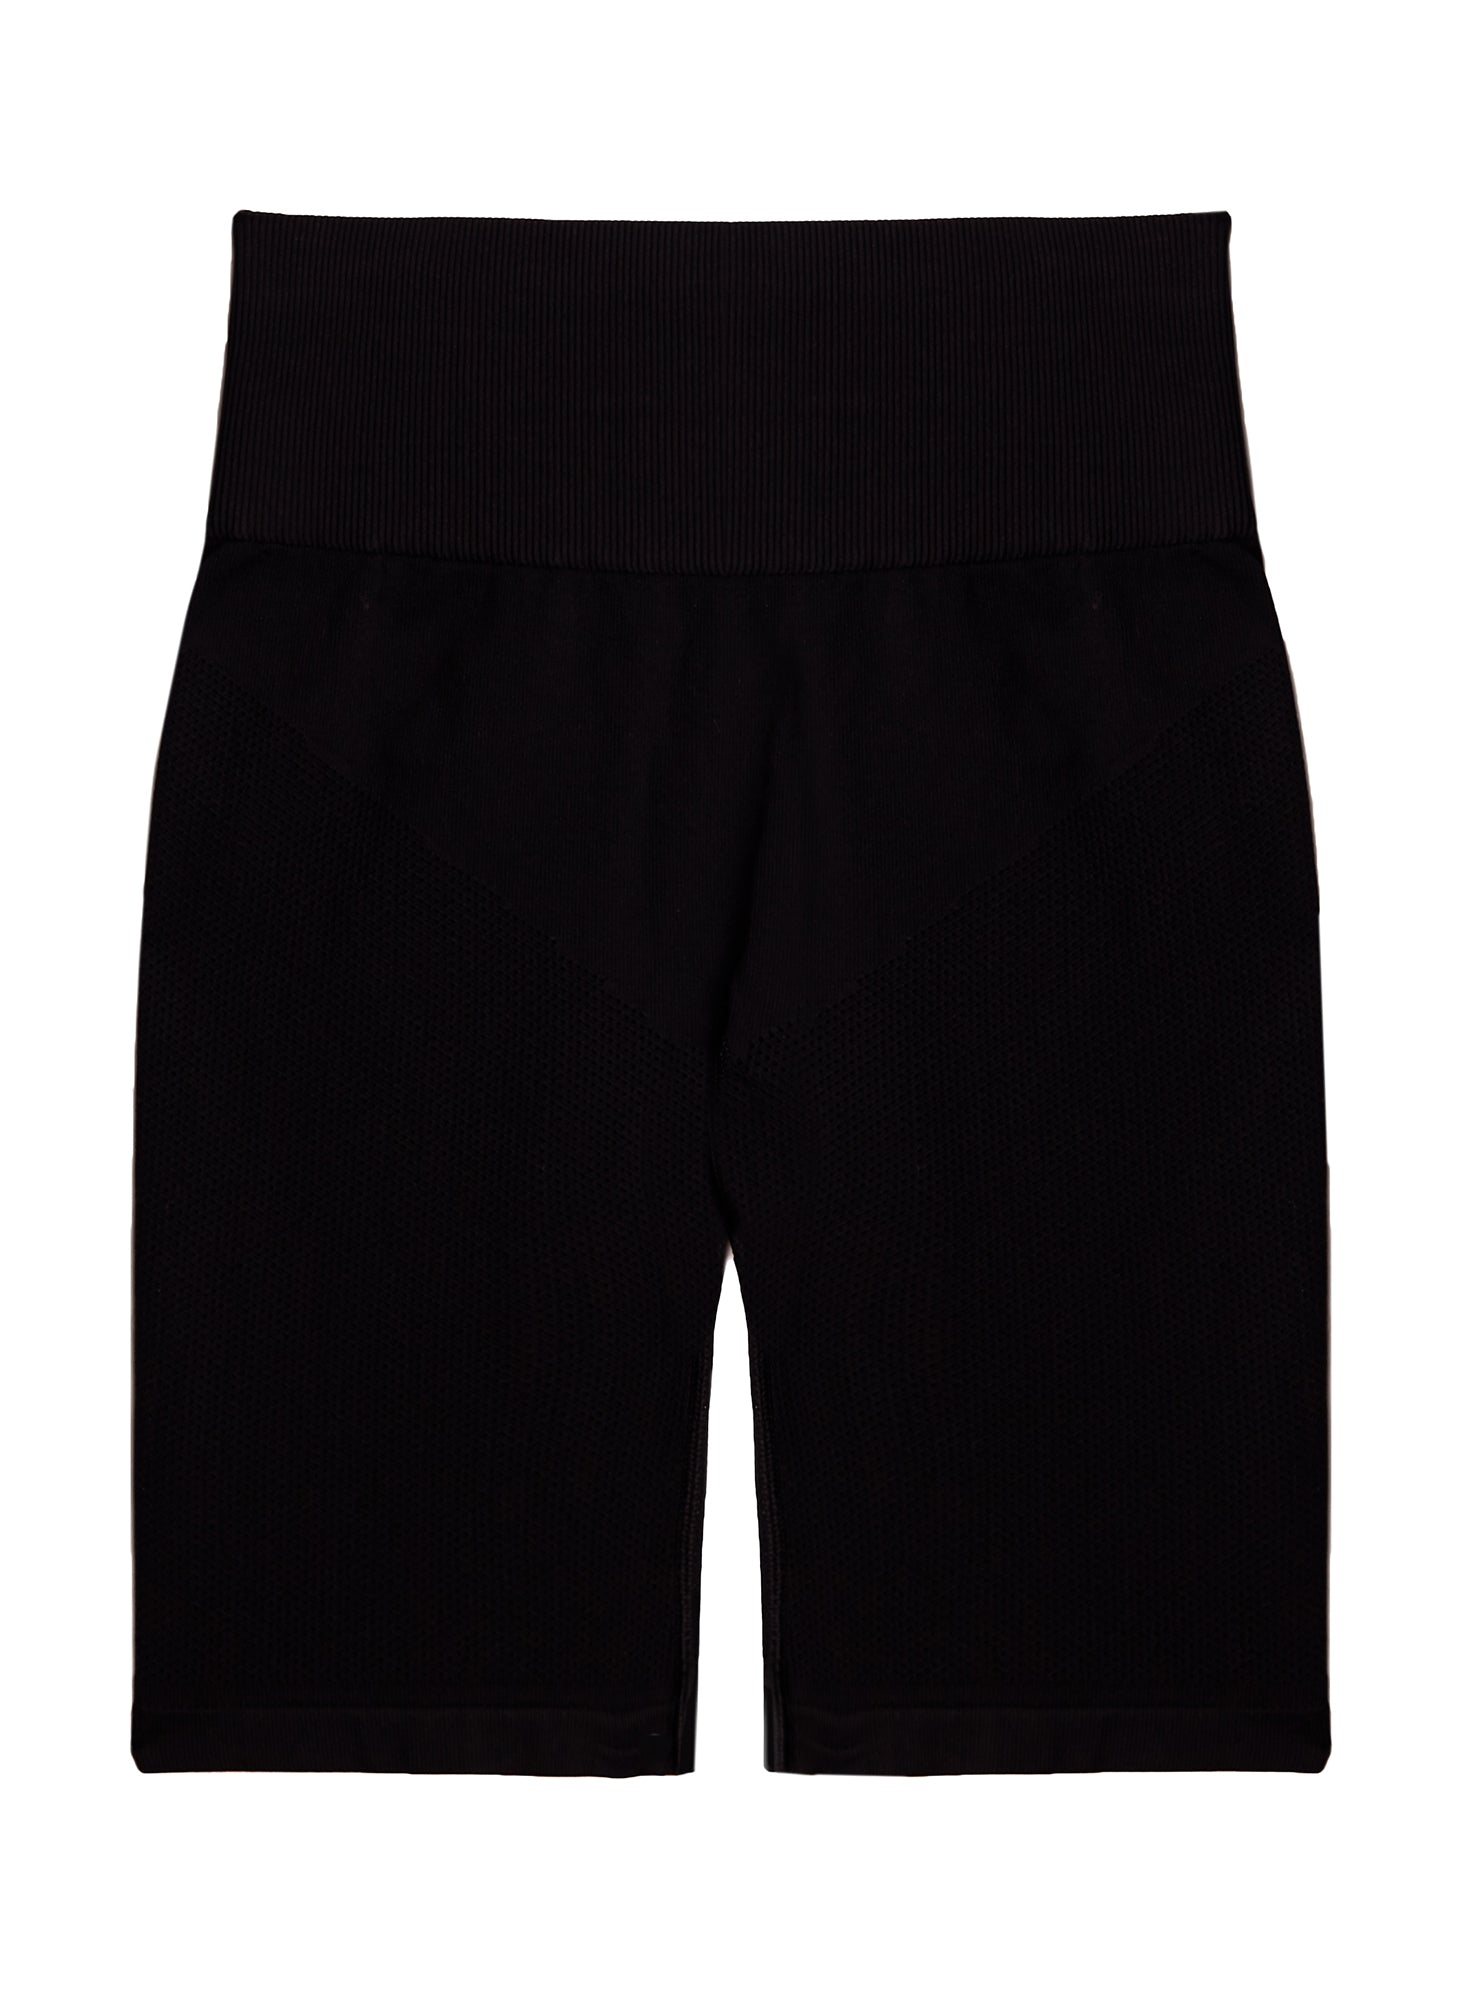 Le Body Perforated Knit Bike Shorts